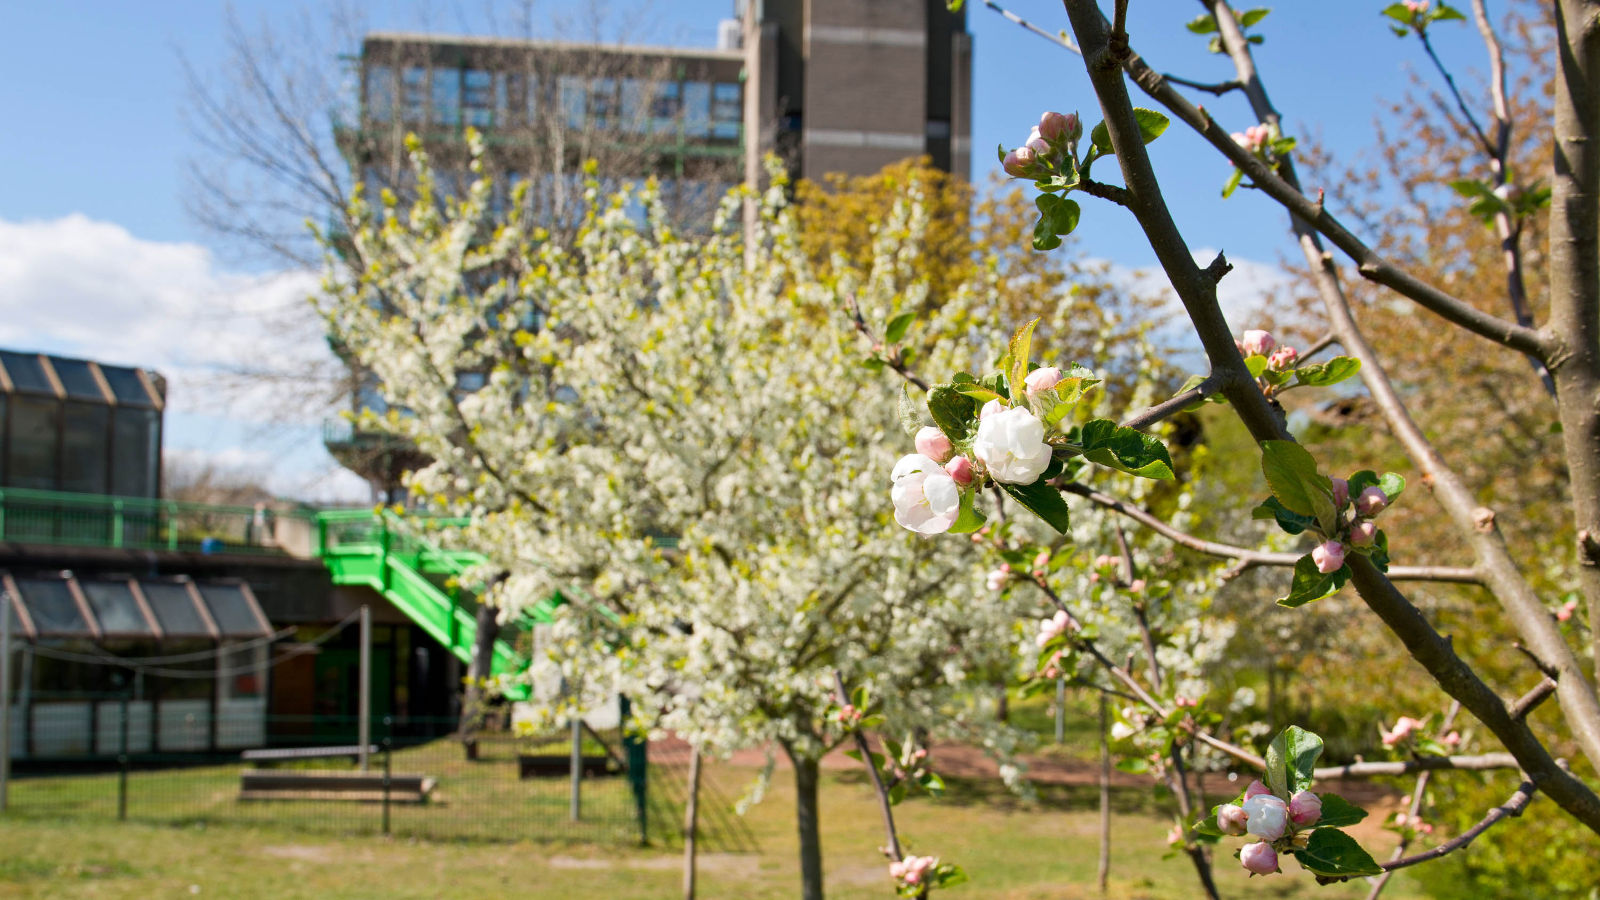 The orchard behind the Sportturm Building